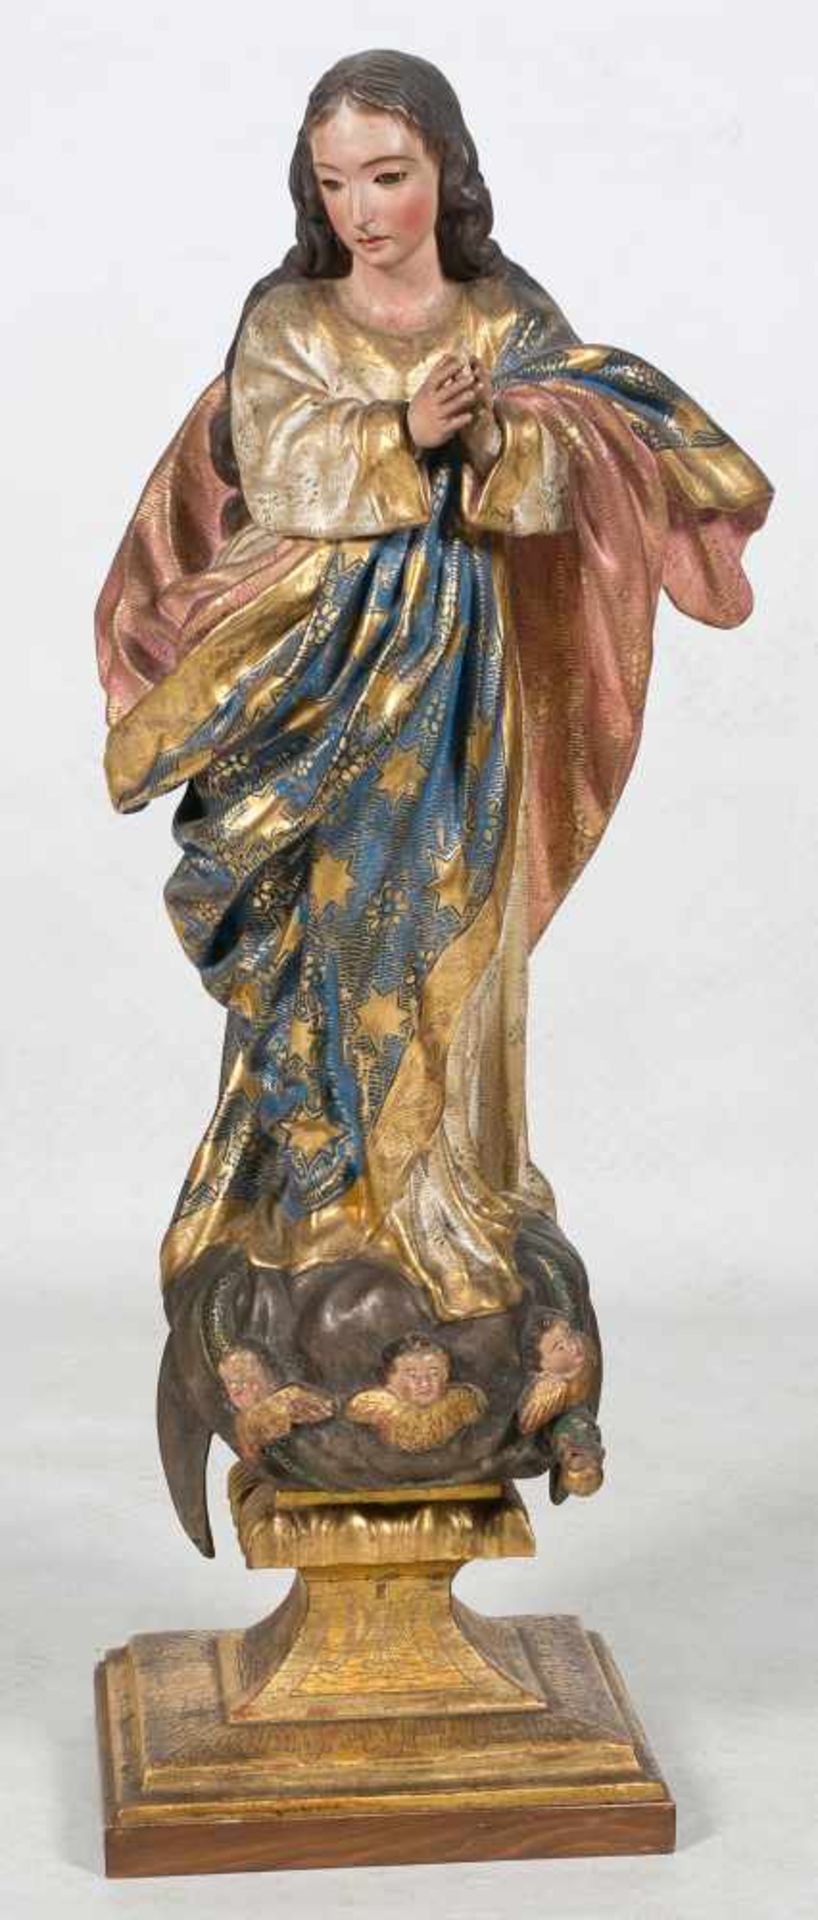 Our Lady Immaculate. Carved, gilded and polychromed wooden sculpture. Early 20th century.